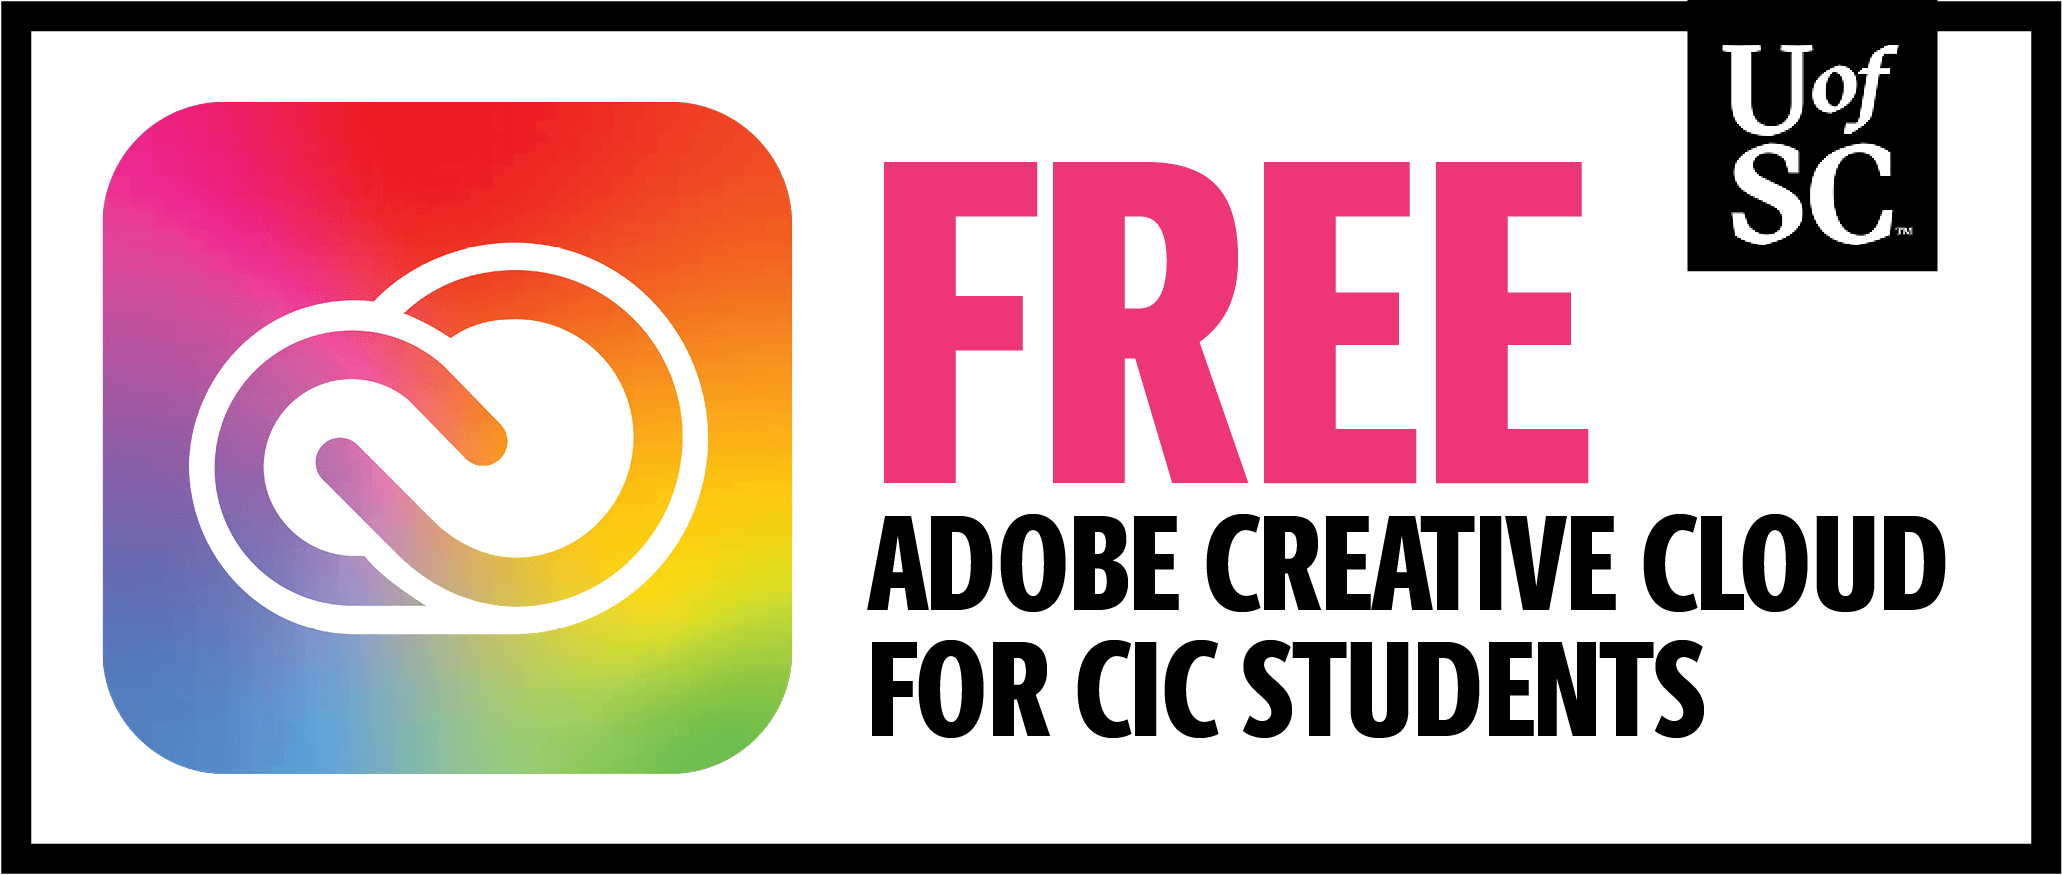 CIC offering students free Adobe Creative Cloud College of